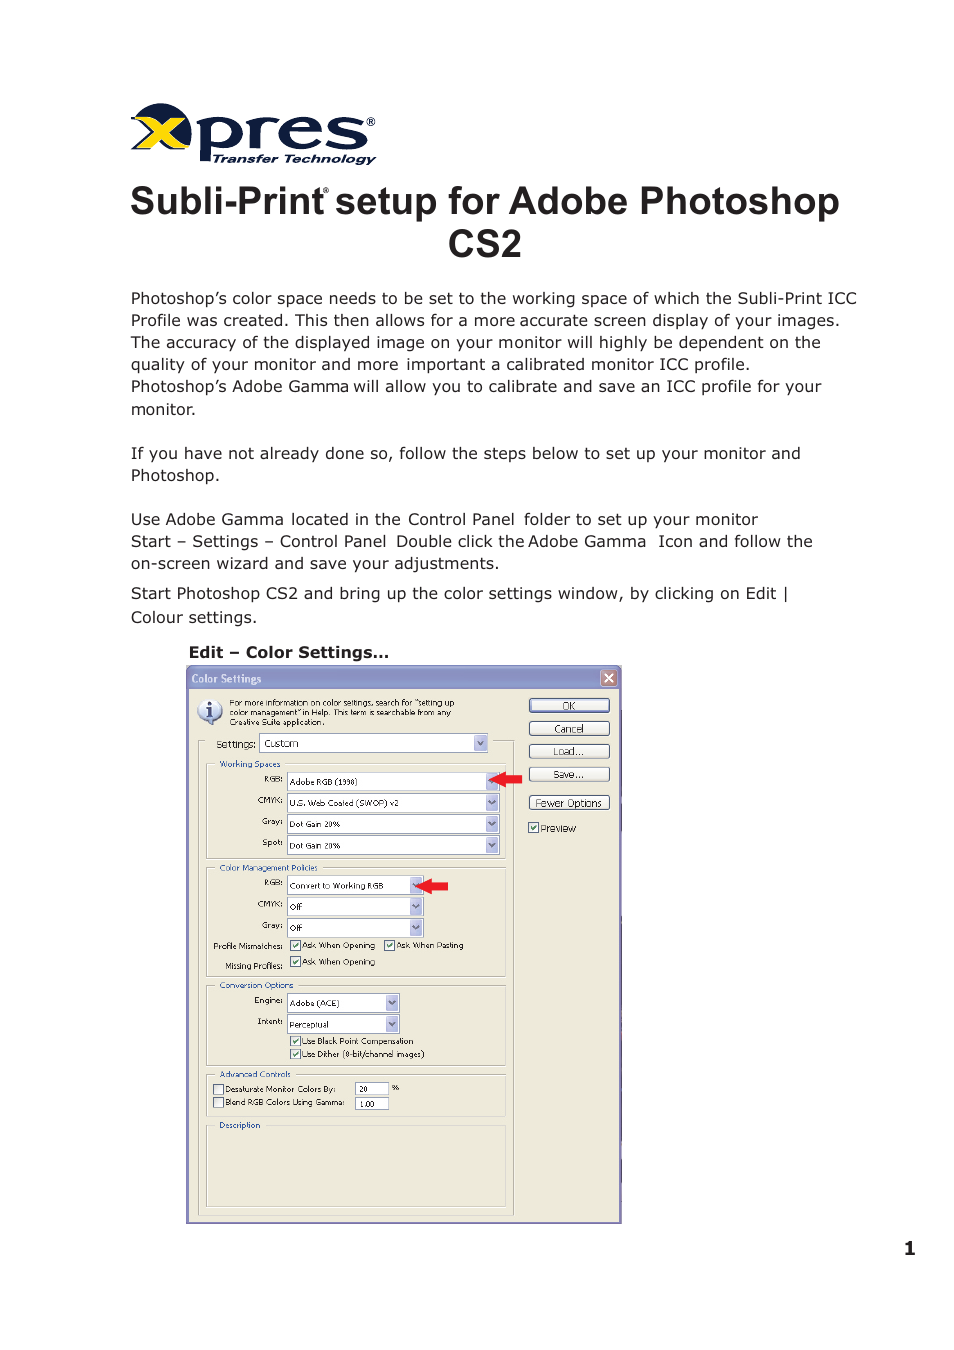 Subli-Print Epson 1290: Adobe Photoshop CS2 instructions (applicable for all other sublimation printers)